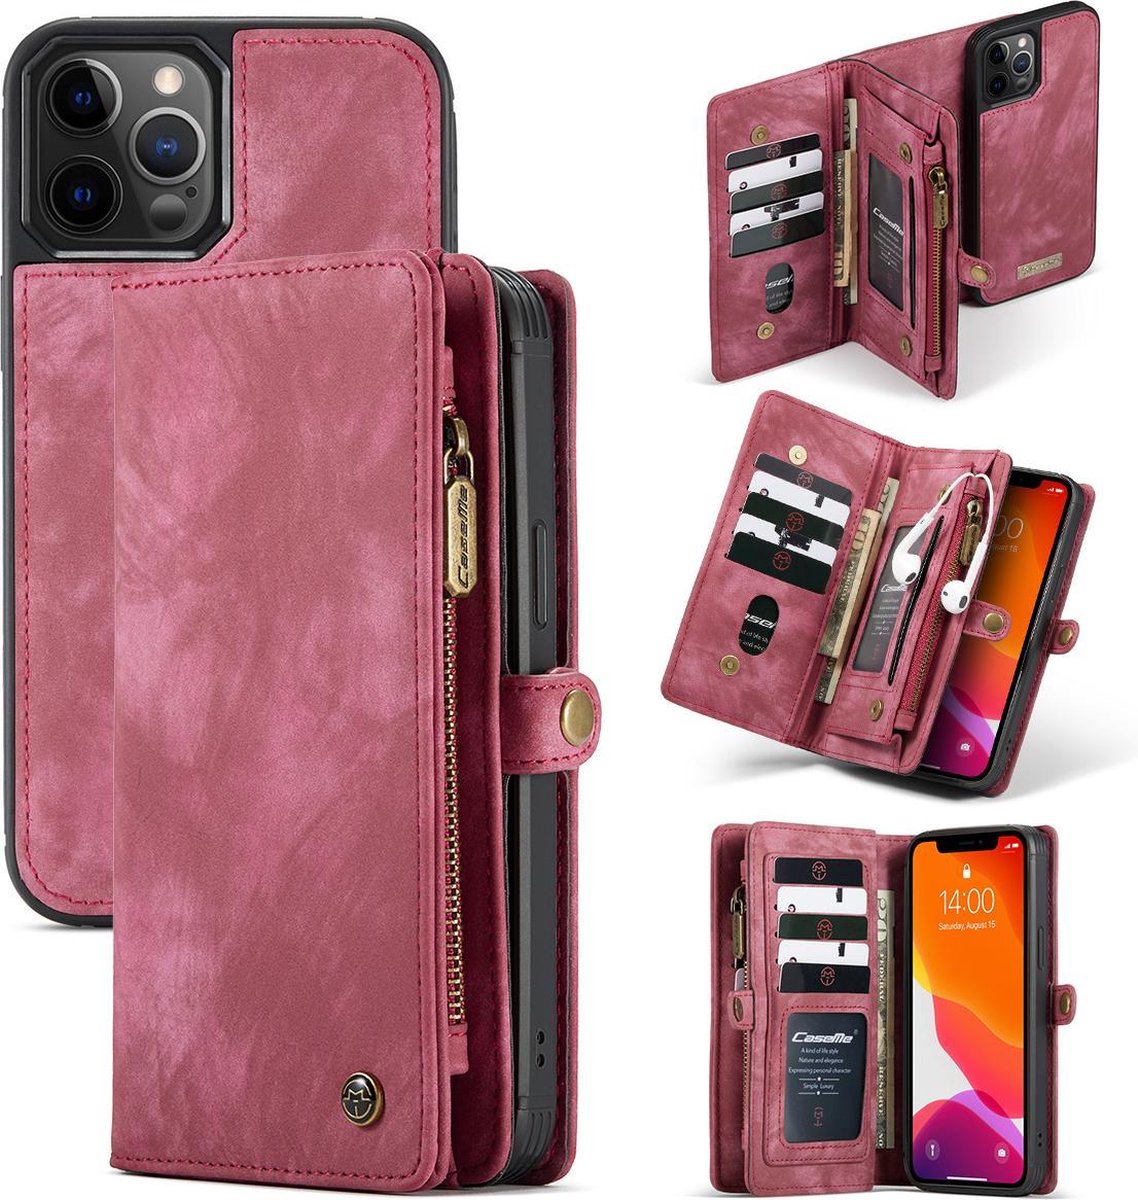 Caseme - vintage 2 in 1 portemonnee hoes - iPhone 12 / iPhone 12 Pro - Rood